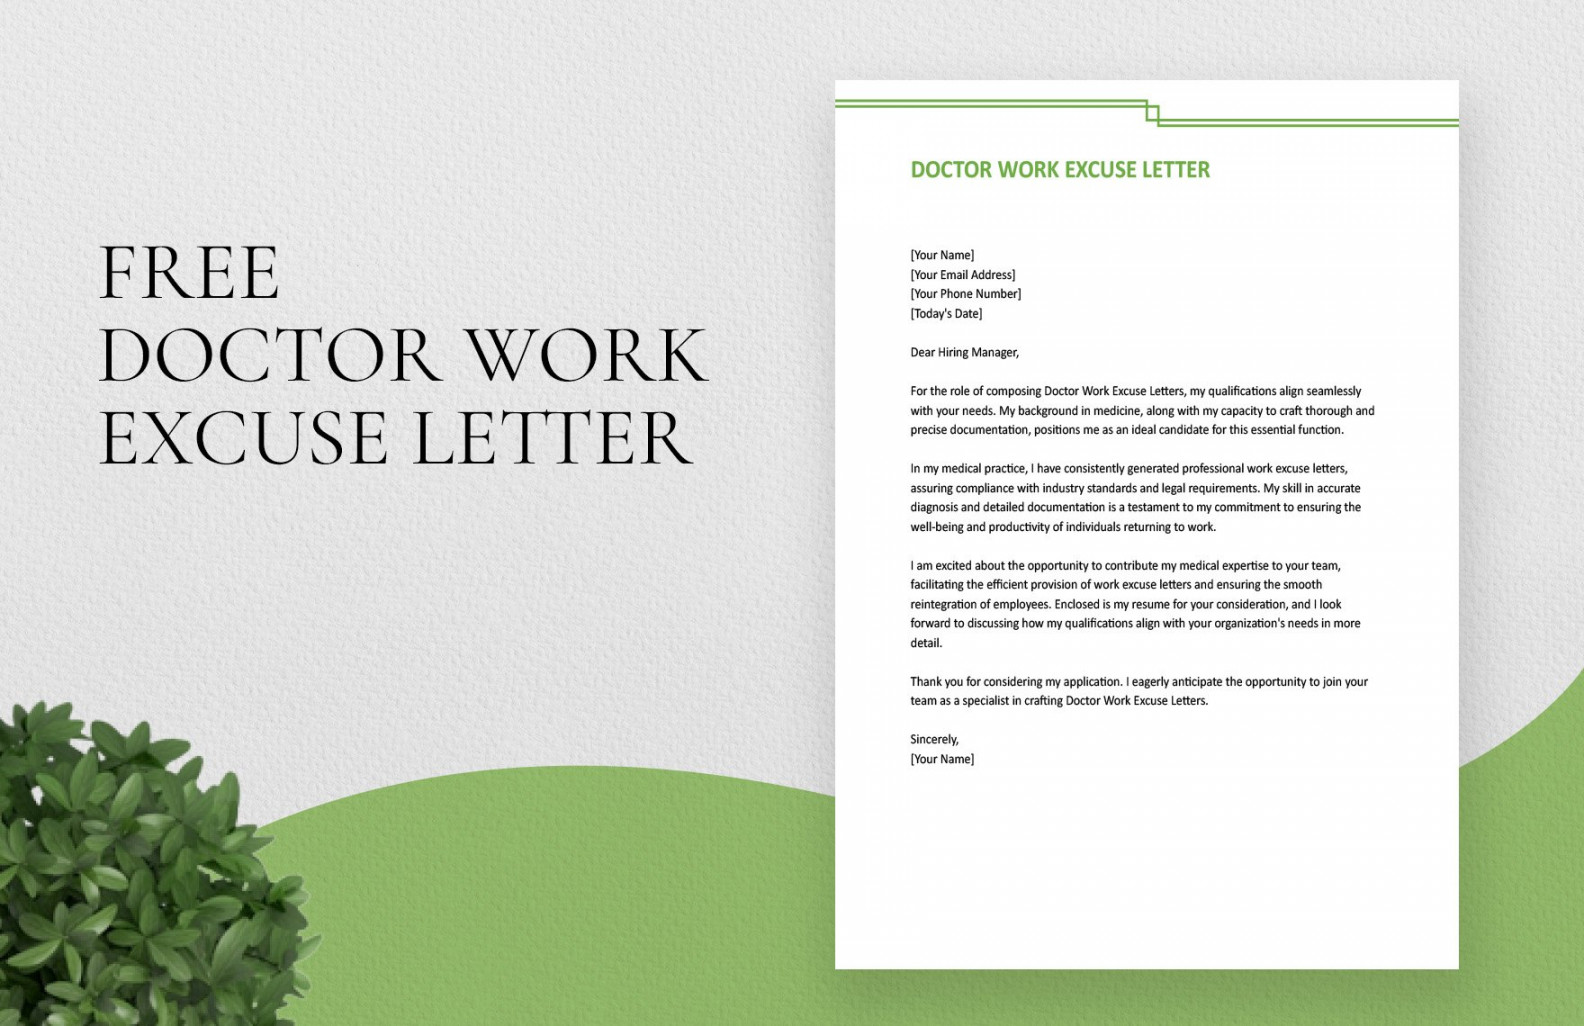 Free Funeral Excuse Letter For Work - Download in Word, Google